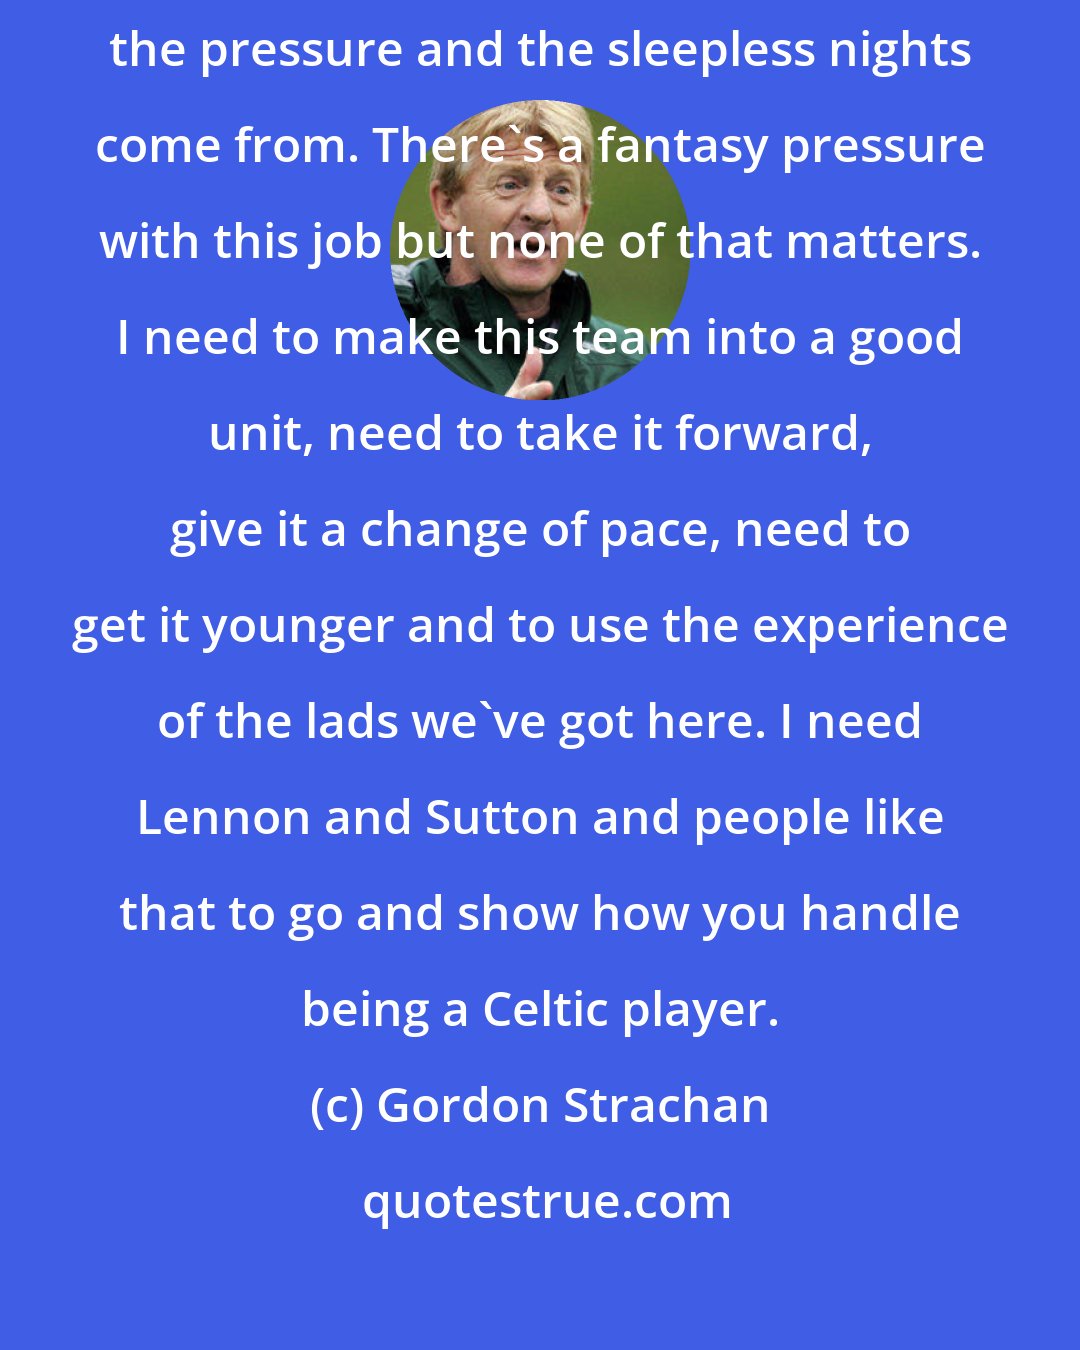 Gordon Strachan: The reality, ... is that I need to win games of football. That's where the pressure and the sleepless nights come from. There's a fantasy pressure with this job but none of that matters. I need to make this team into a good unit, need to take it forward, give it a change of pace, need to get it younger and to use the experience of the lads we've got here. I need Lennon and Sutton and people like that to go and show how you handle being a Celtic player.